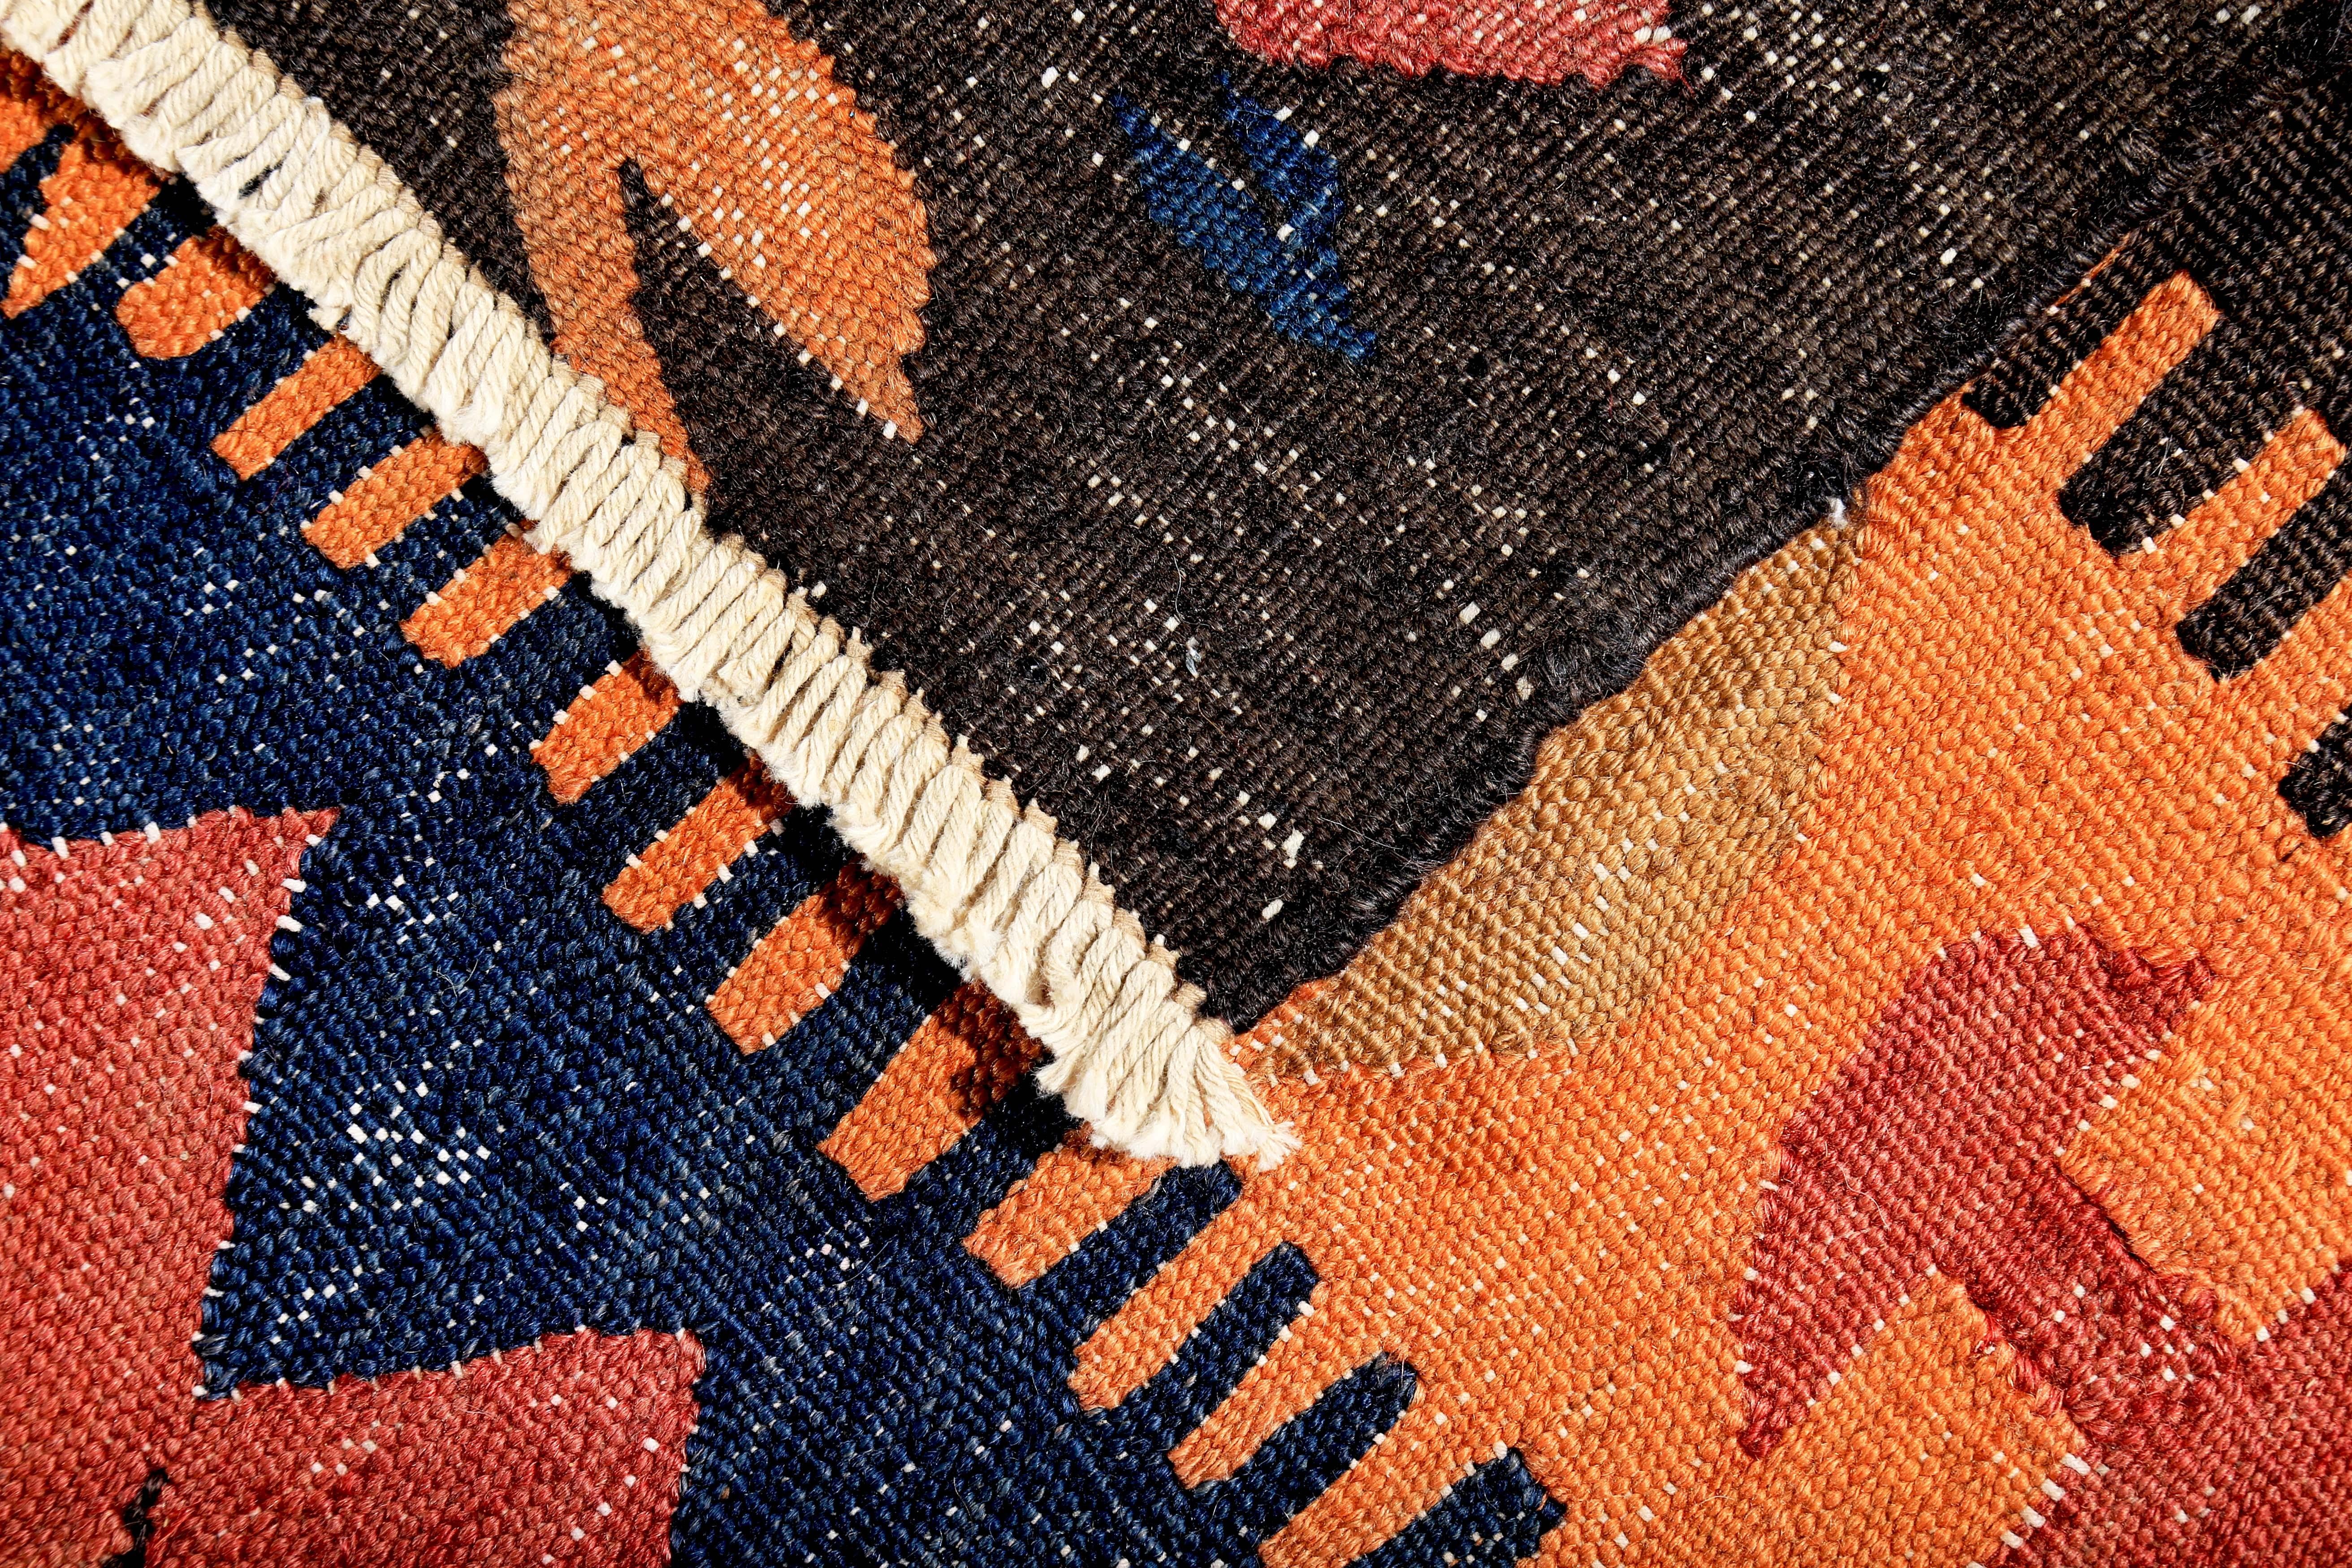 Hand-Woven Turkish Kilim Runner Rug with Tribal Details in Red, Blue and Orange